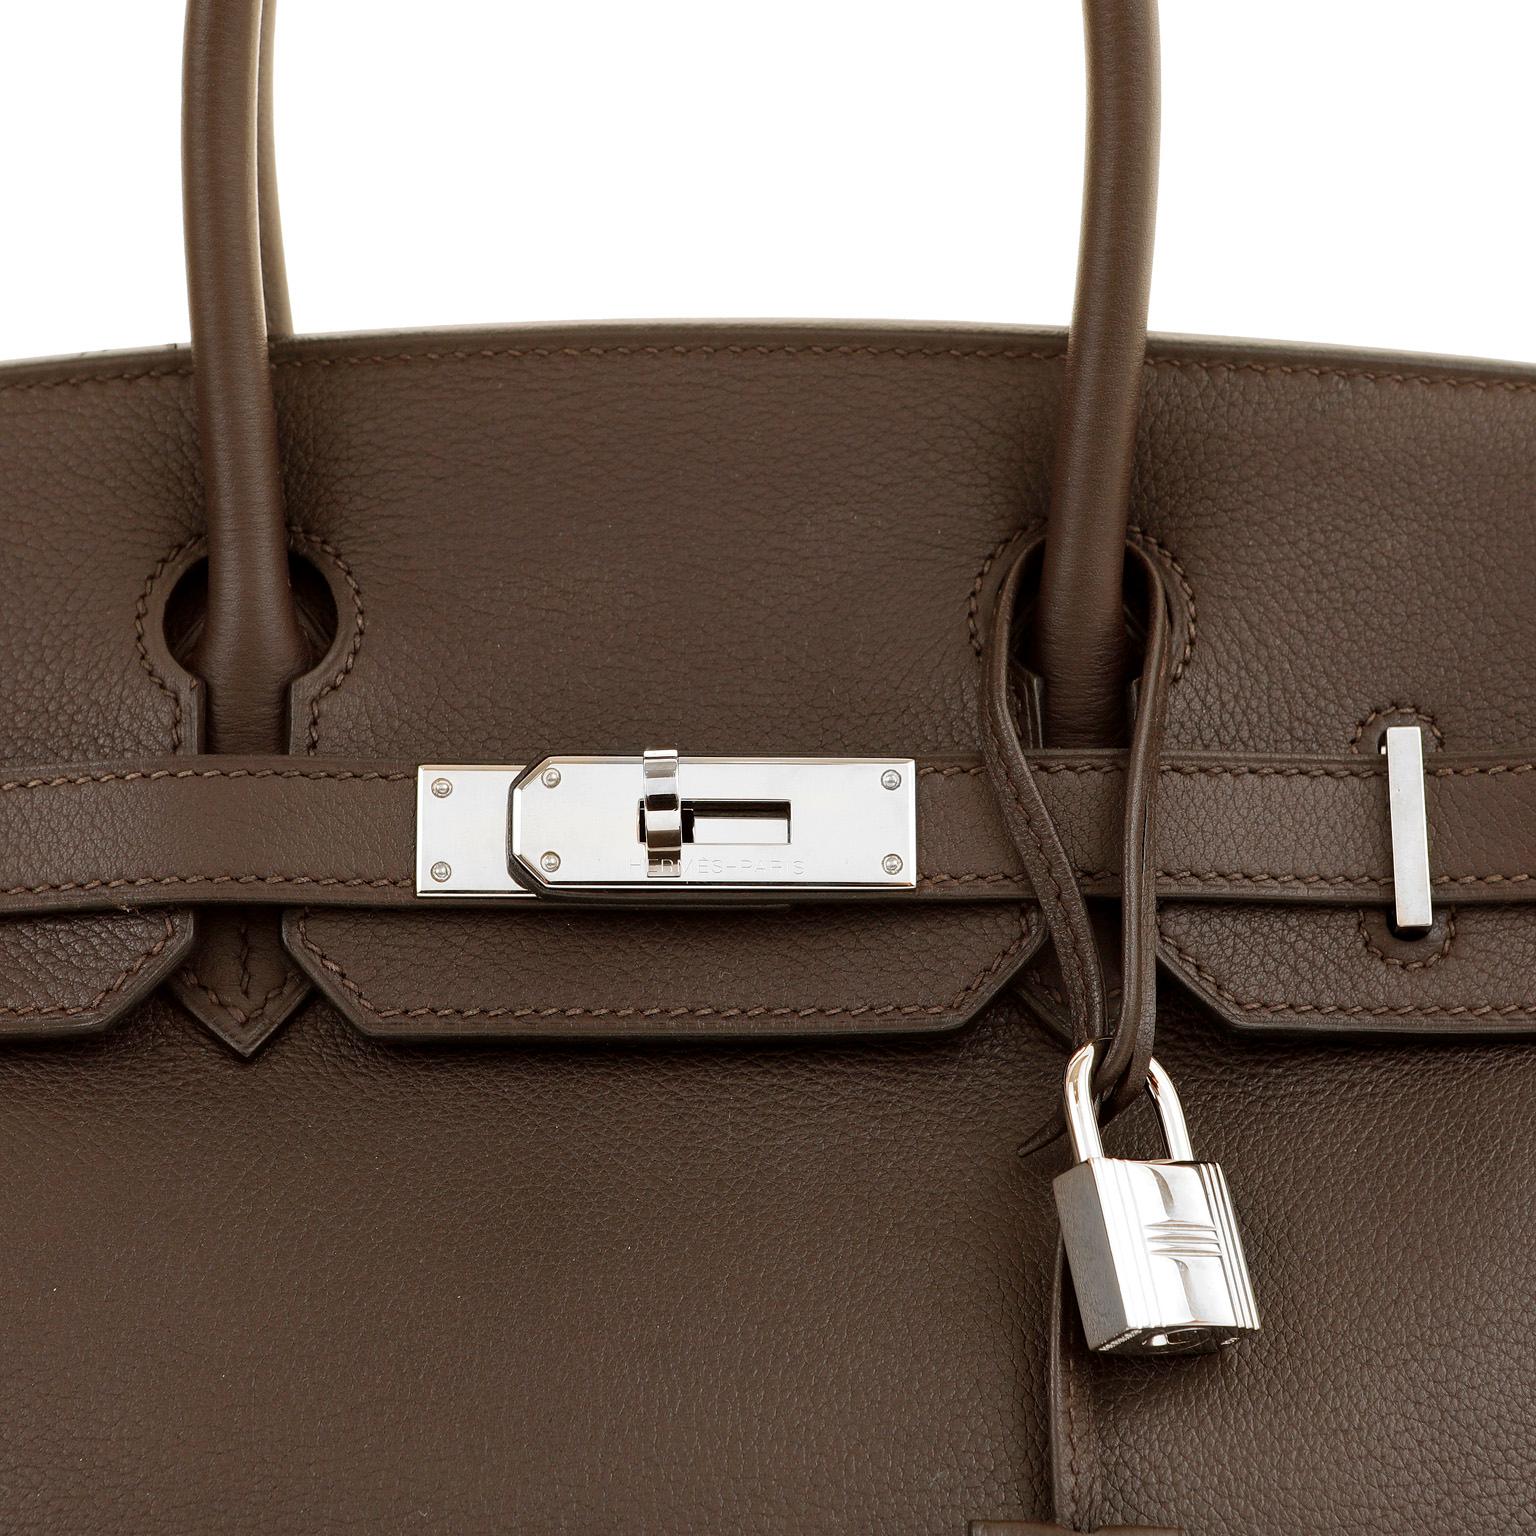 This authentic Hermès 30 cm Deep Brown Evergrain Birkin is in pristine condition.  Hand sewn and coveted worldwide; the Hermès Birkin is considered the epitome of luxury handbags.  Deep Havana Brown evokes the darkest espresso bean and is perfectly